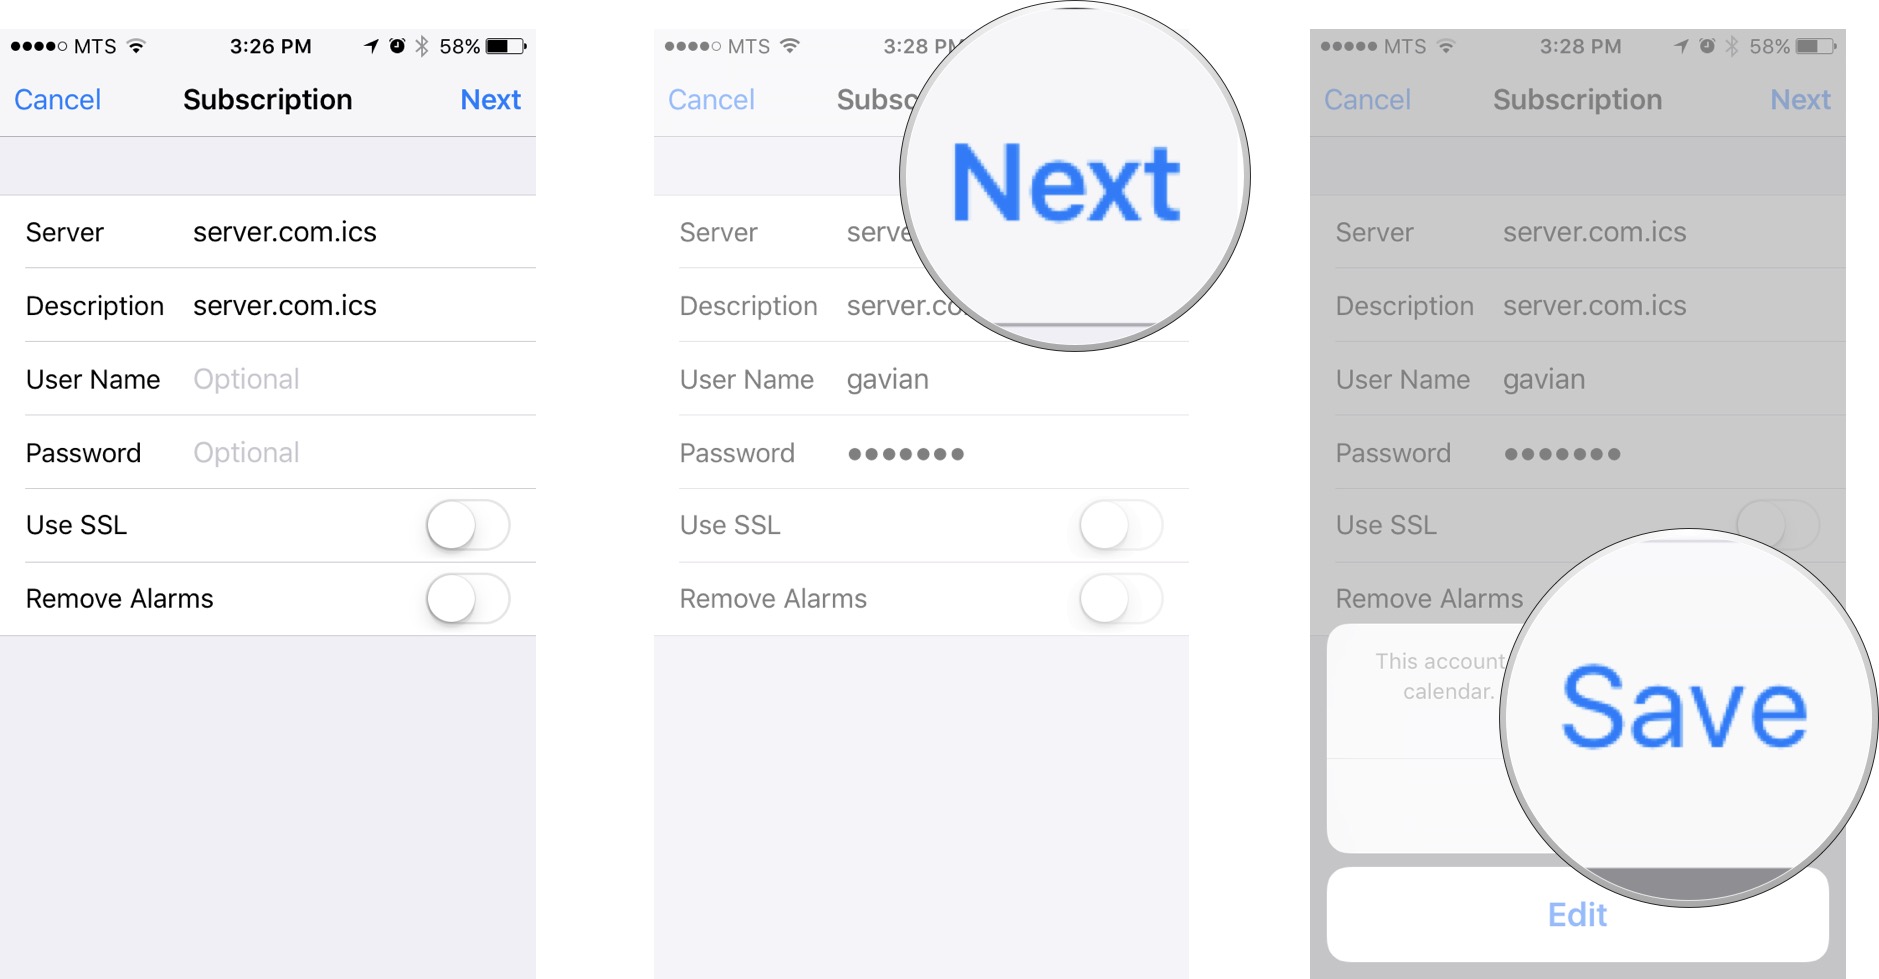 Enter any username, password, or SSL info you need to, then tap the Next button, and then tap the Save button.